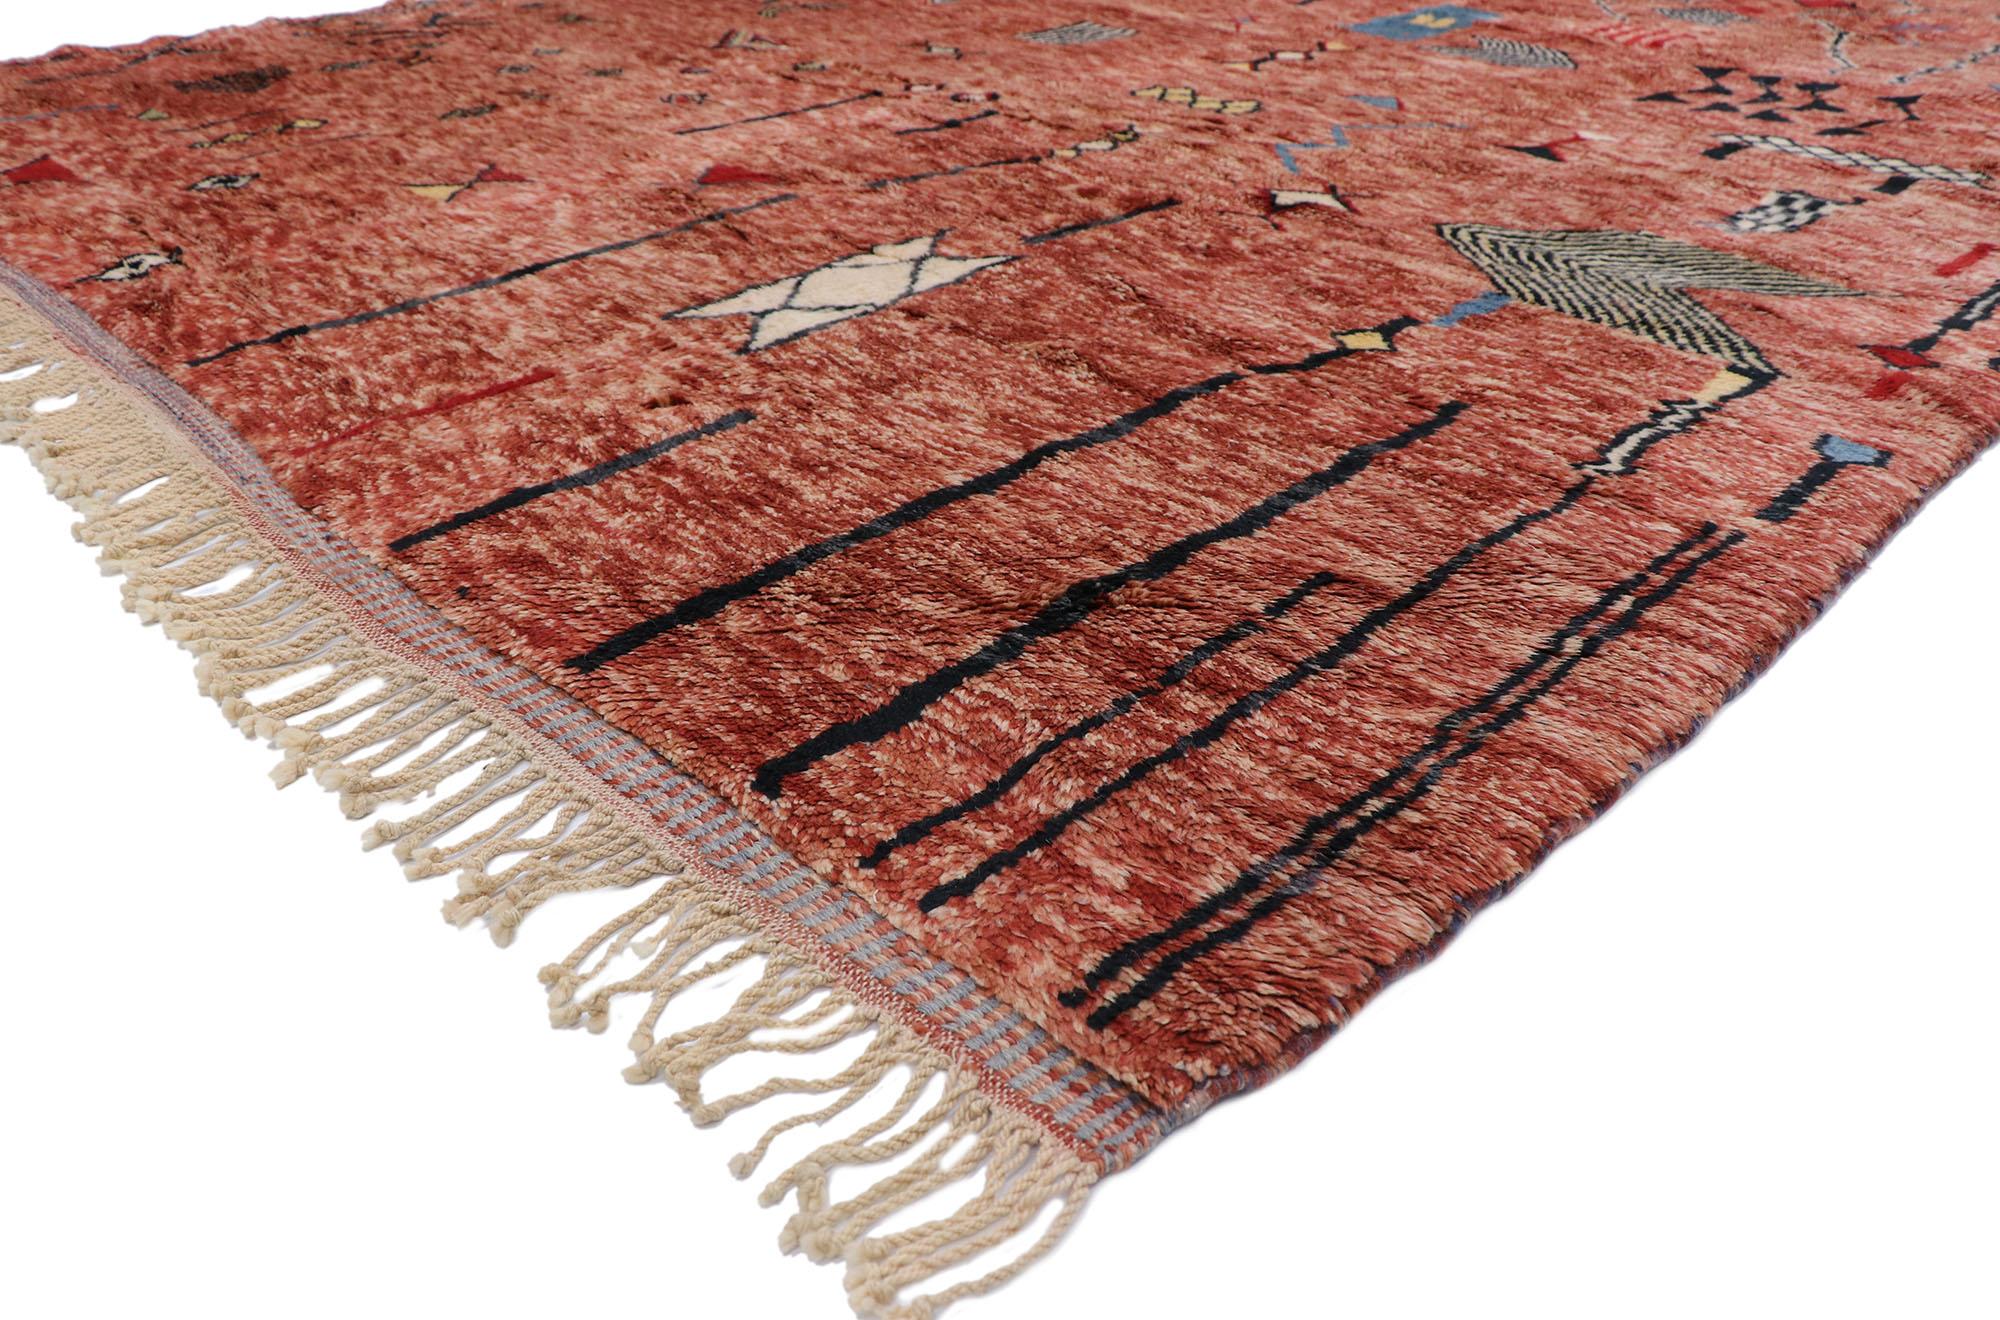 21167, new Contemporary Berber Moroccan rug with Tribal style. Displaying well-balanced asymmetry and a bold expressive tribal design with incredible detail and texture, this hand knotted wool contemporary Berber Moroccan rug is a captivating vision